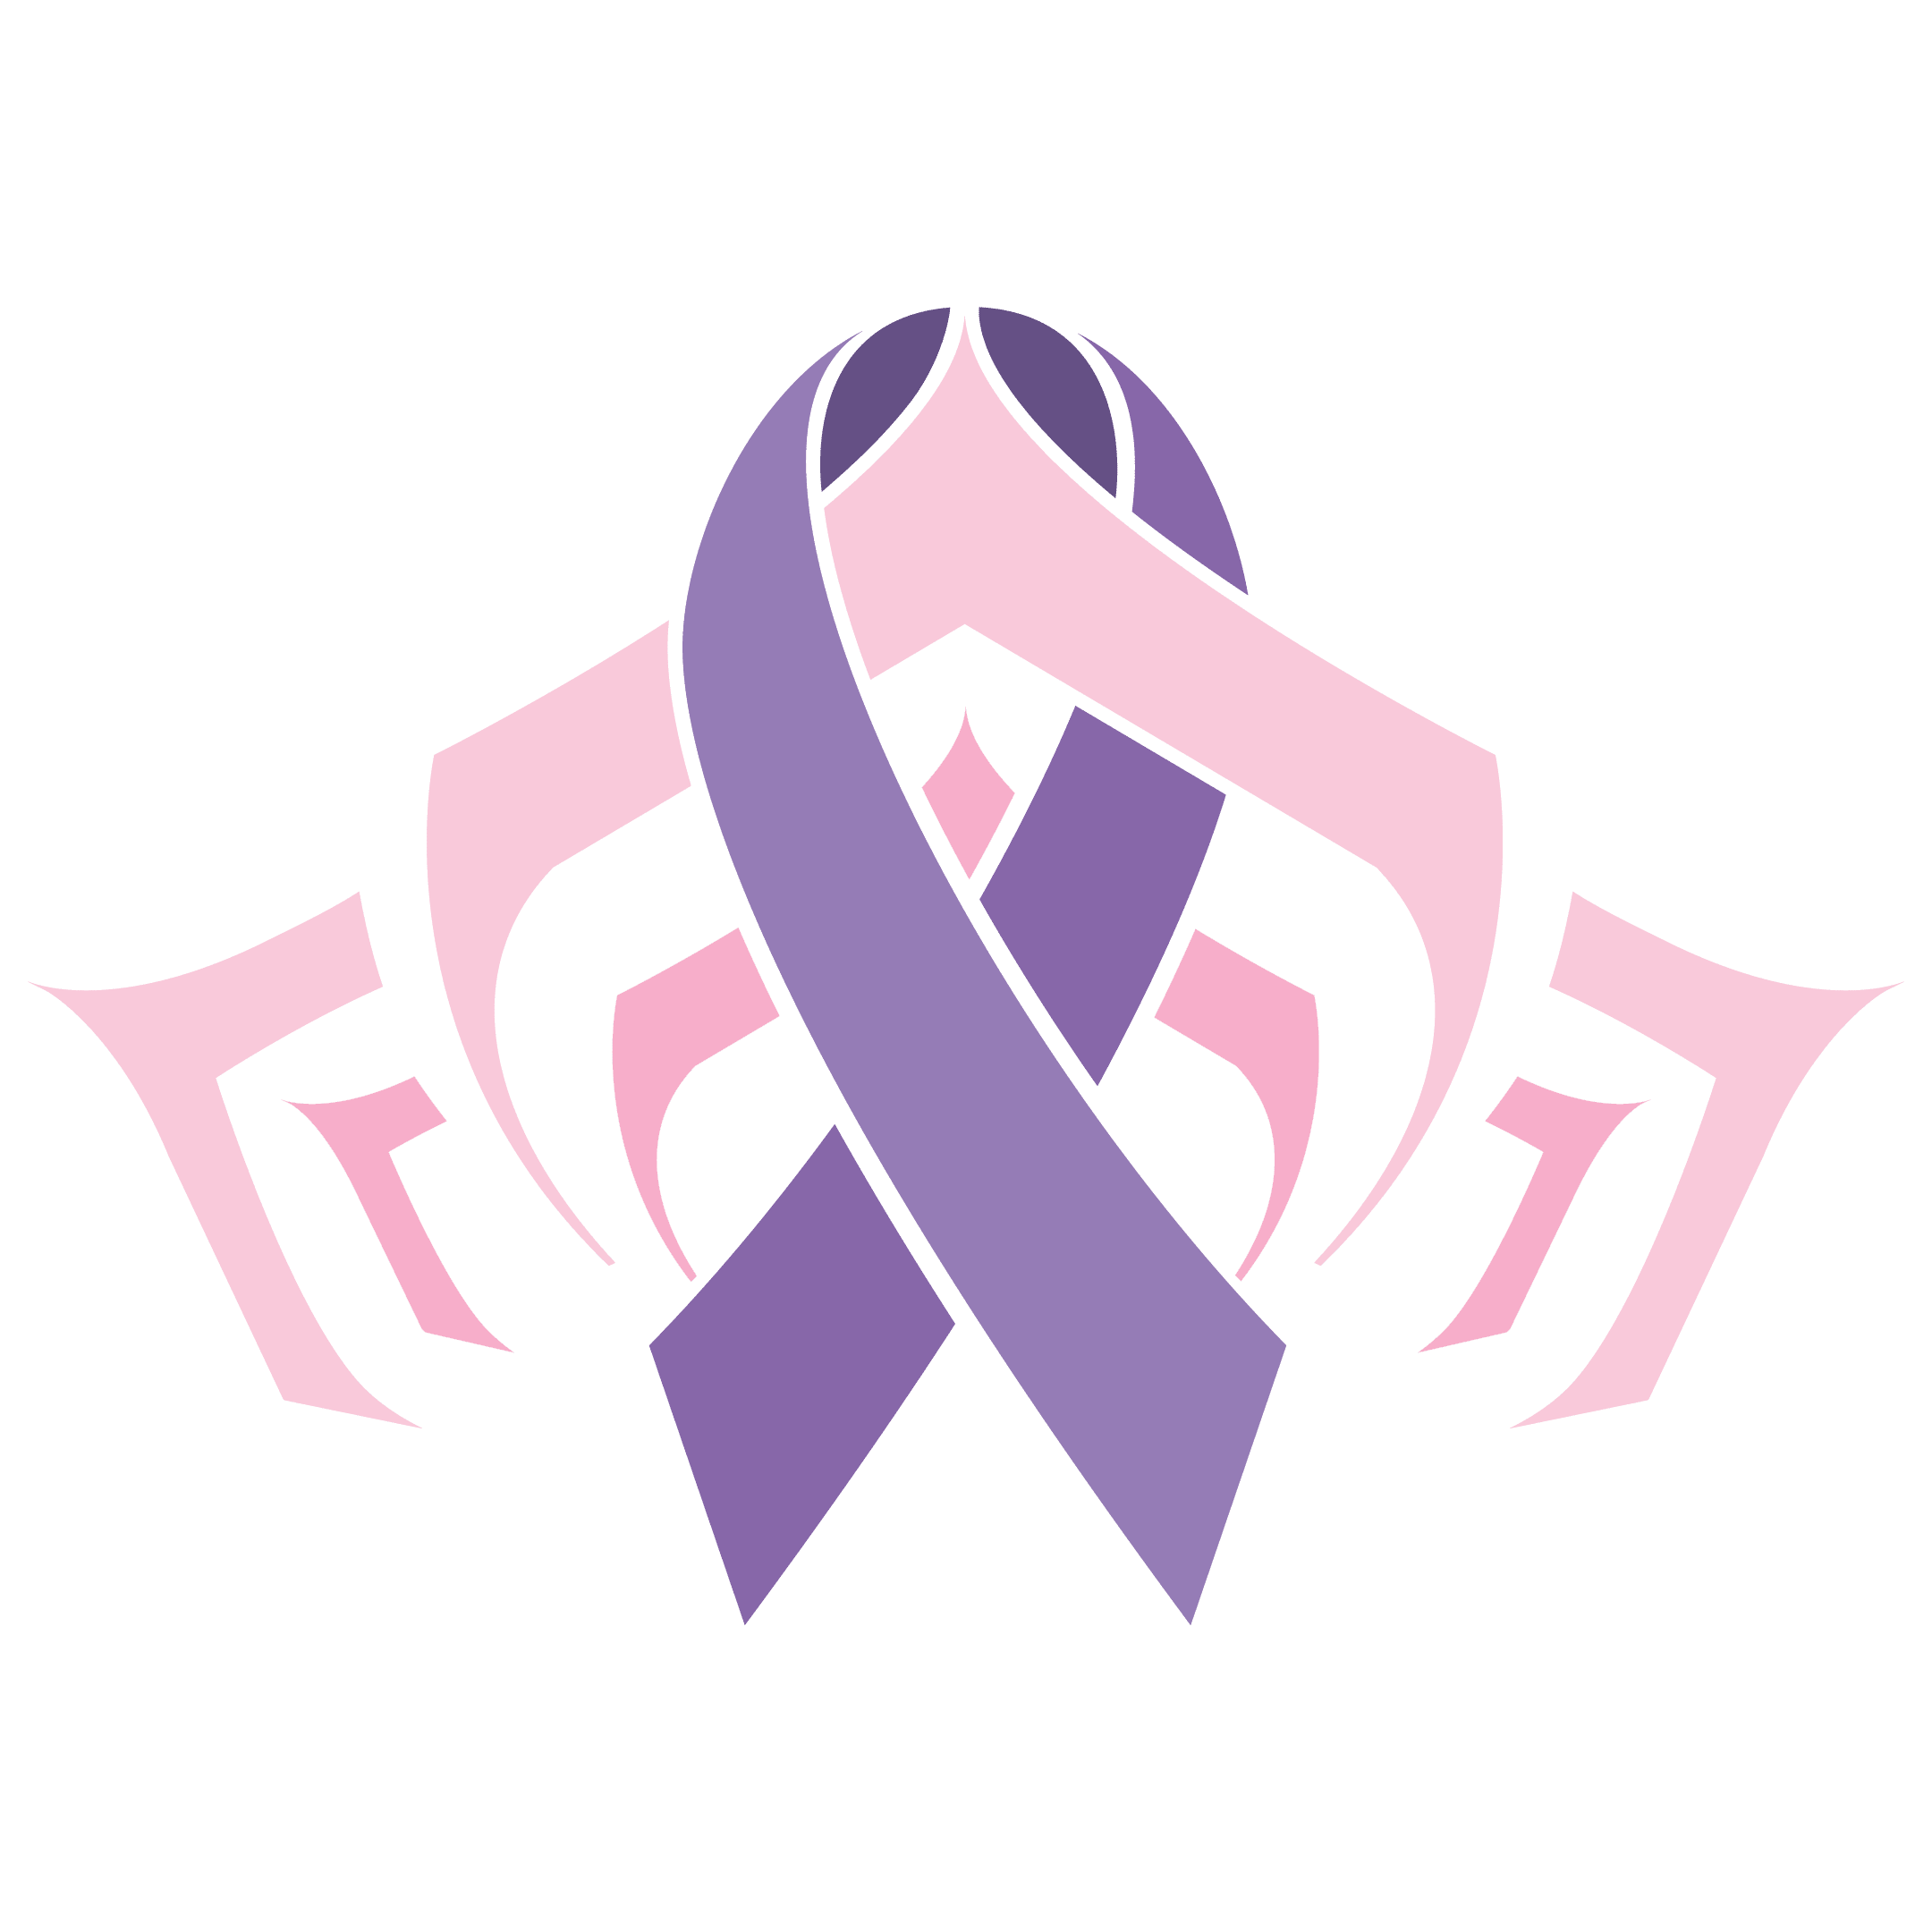 Conquera United Sigil and Glyph with lavender ribbon